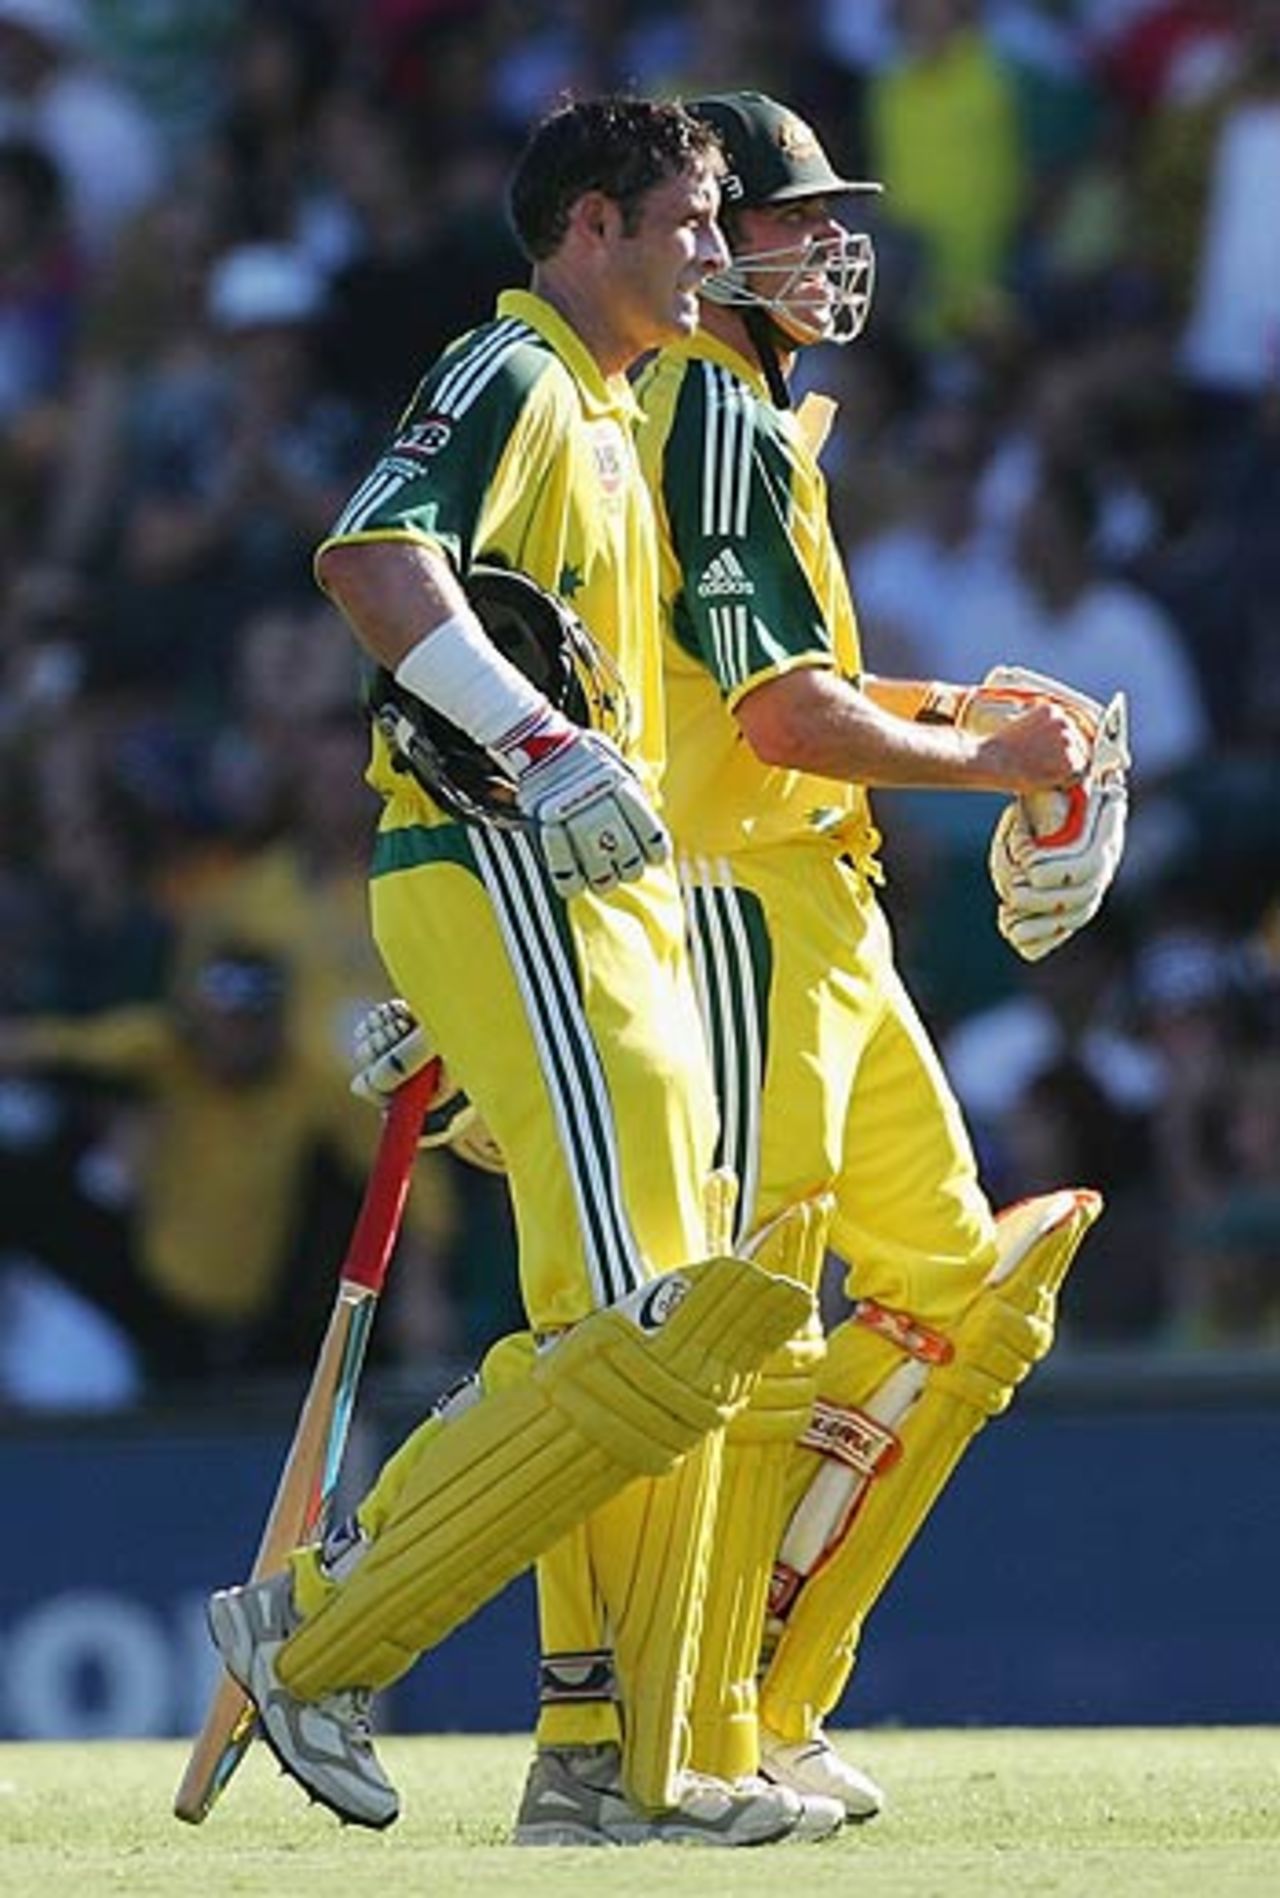 Michael Hussey and Damien Martyn leave after a job well done, Australia v South Africa, VB Series, Sydney, February 5, 2006